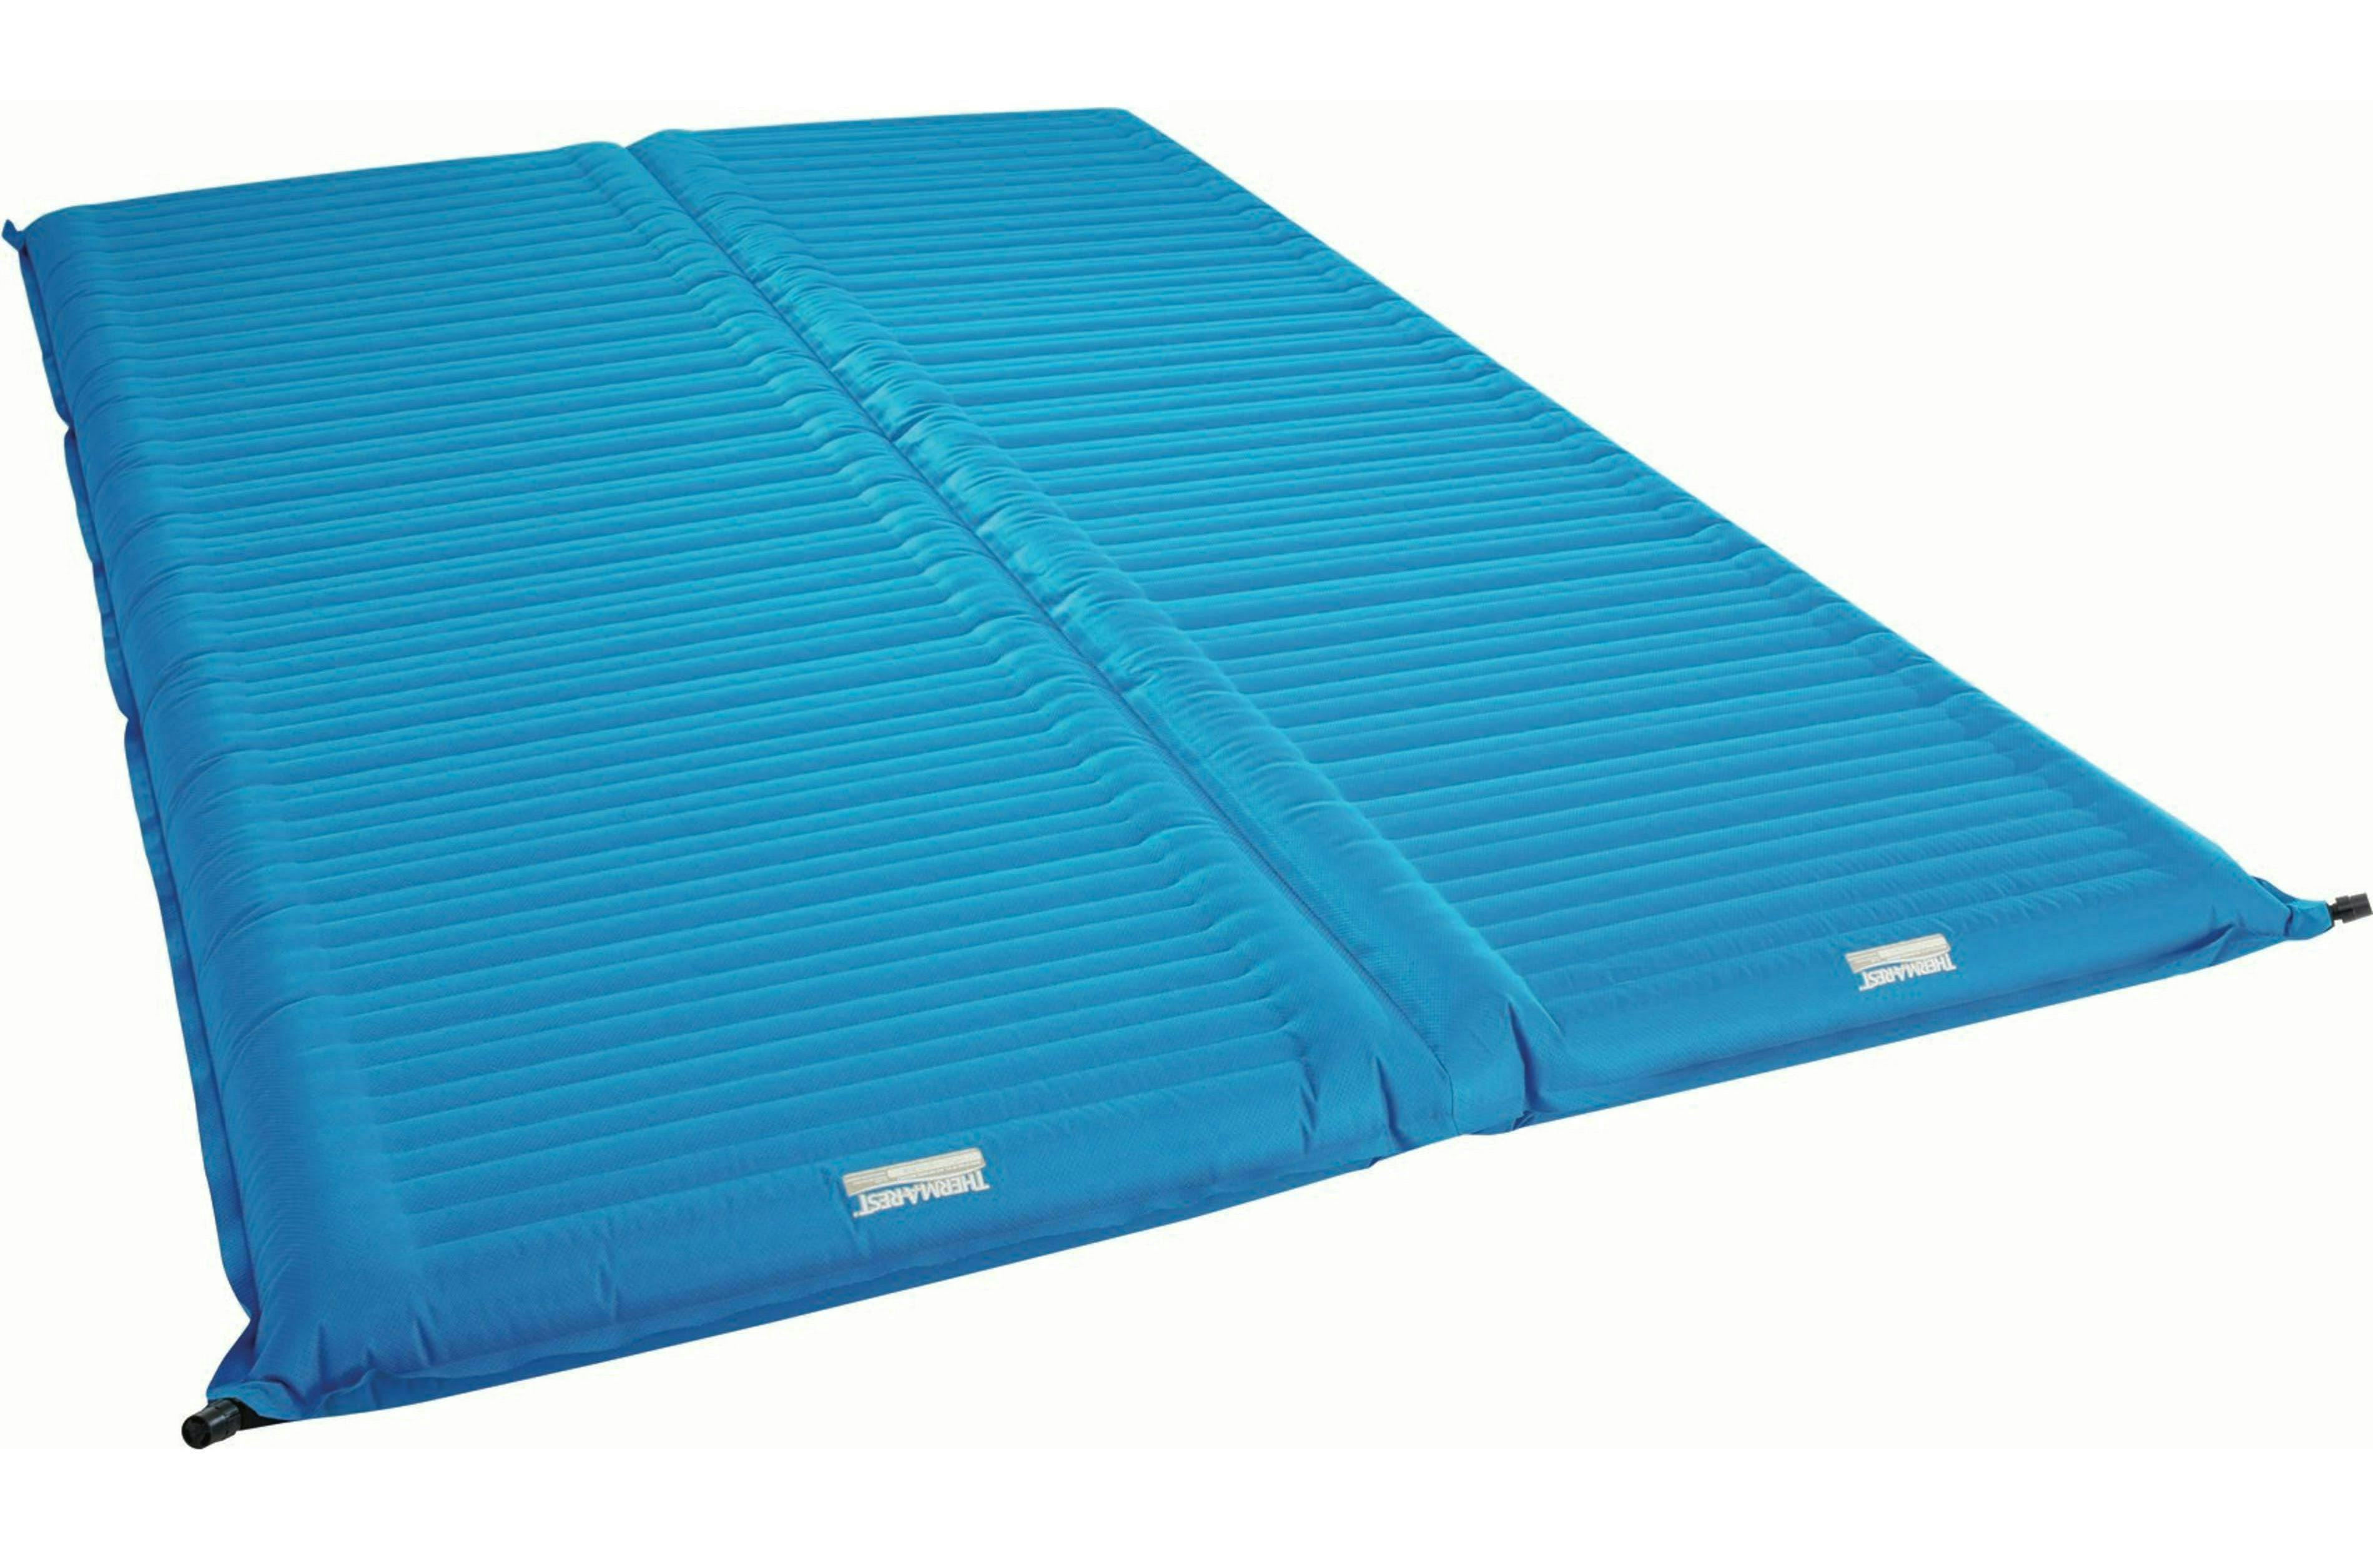 Therm-a-rest double sleeping pad